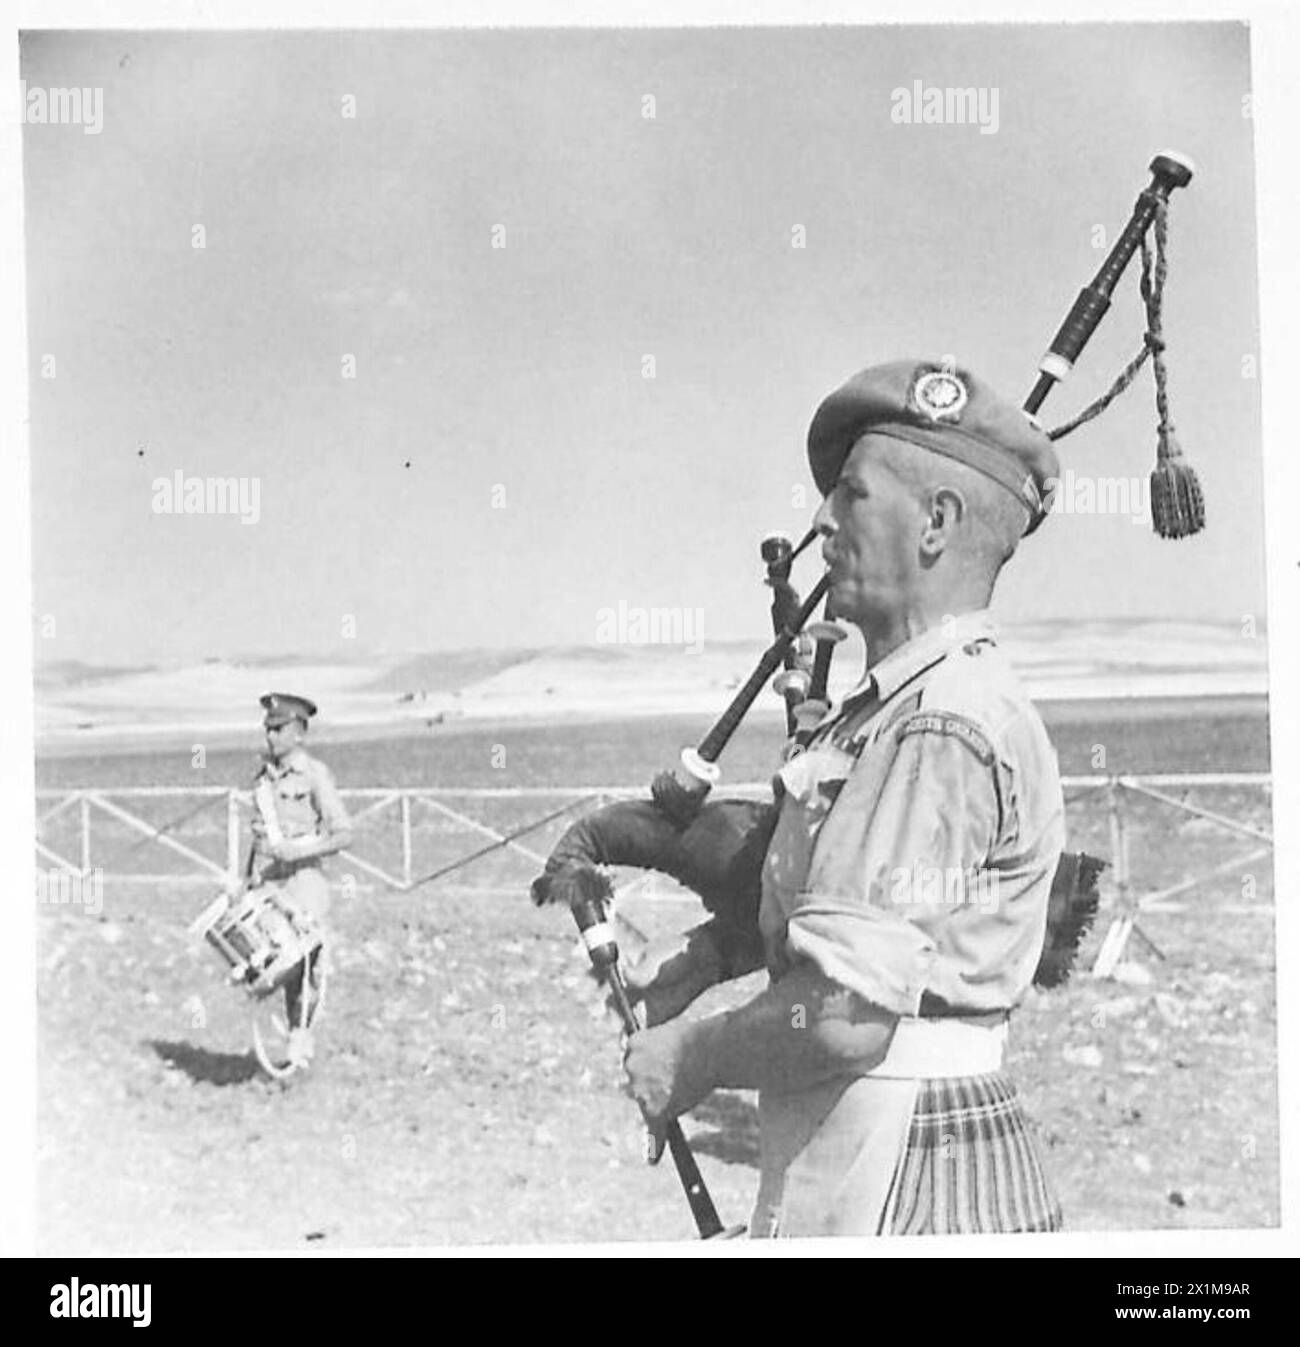 N. AFRICA (BEJA) RACE MEETING - Pipers of the 1st Bn. Scots Guards entertain the crowd between races, British Army Stock Photo